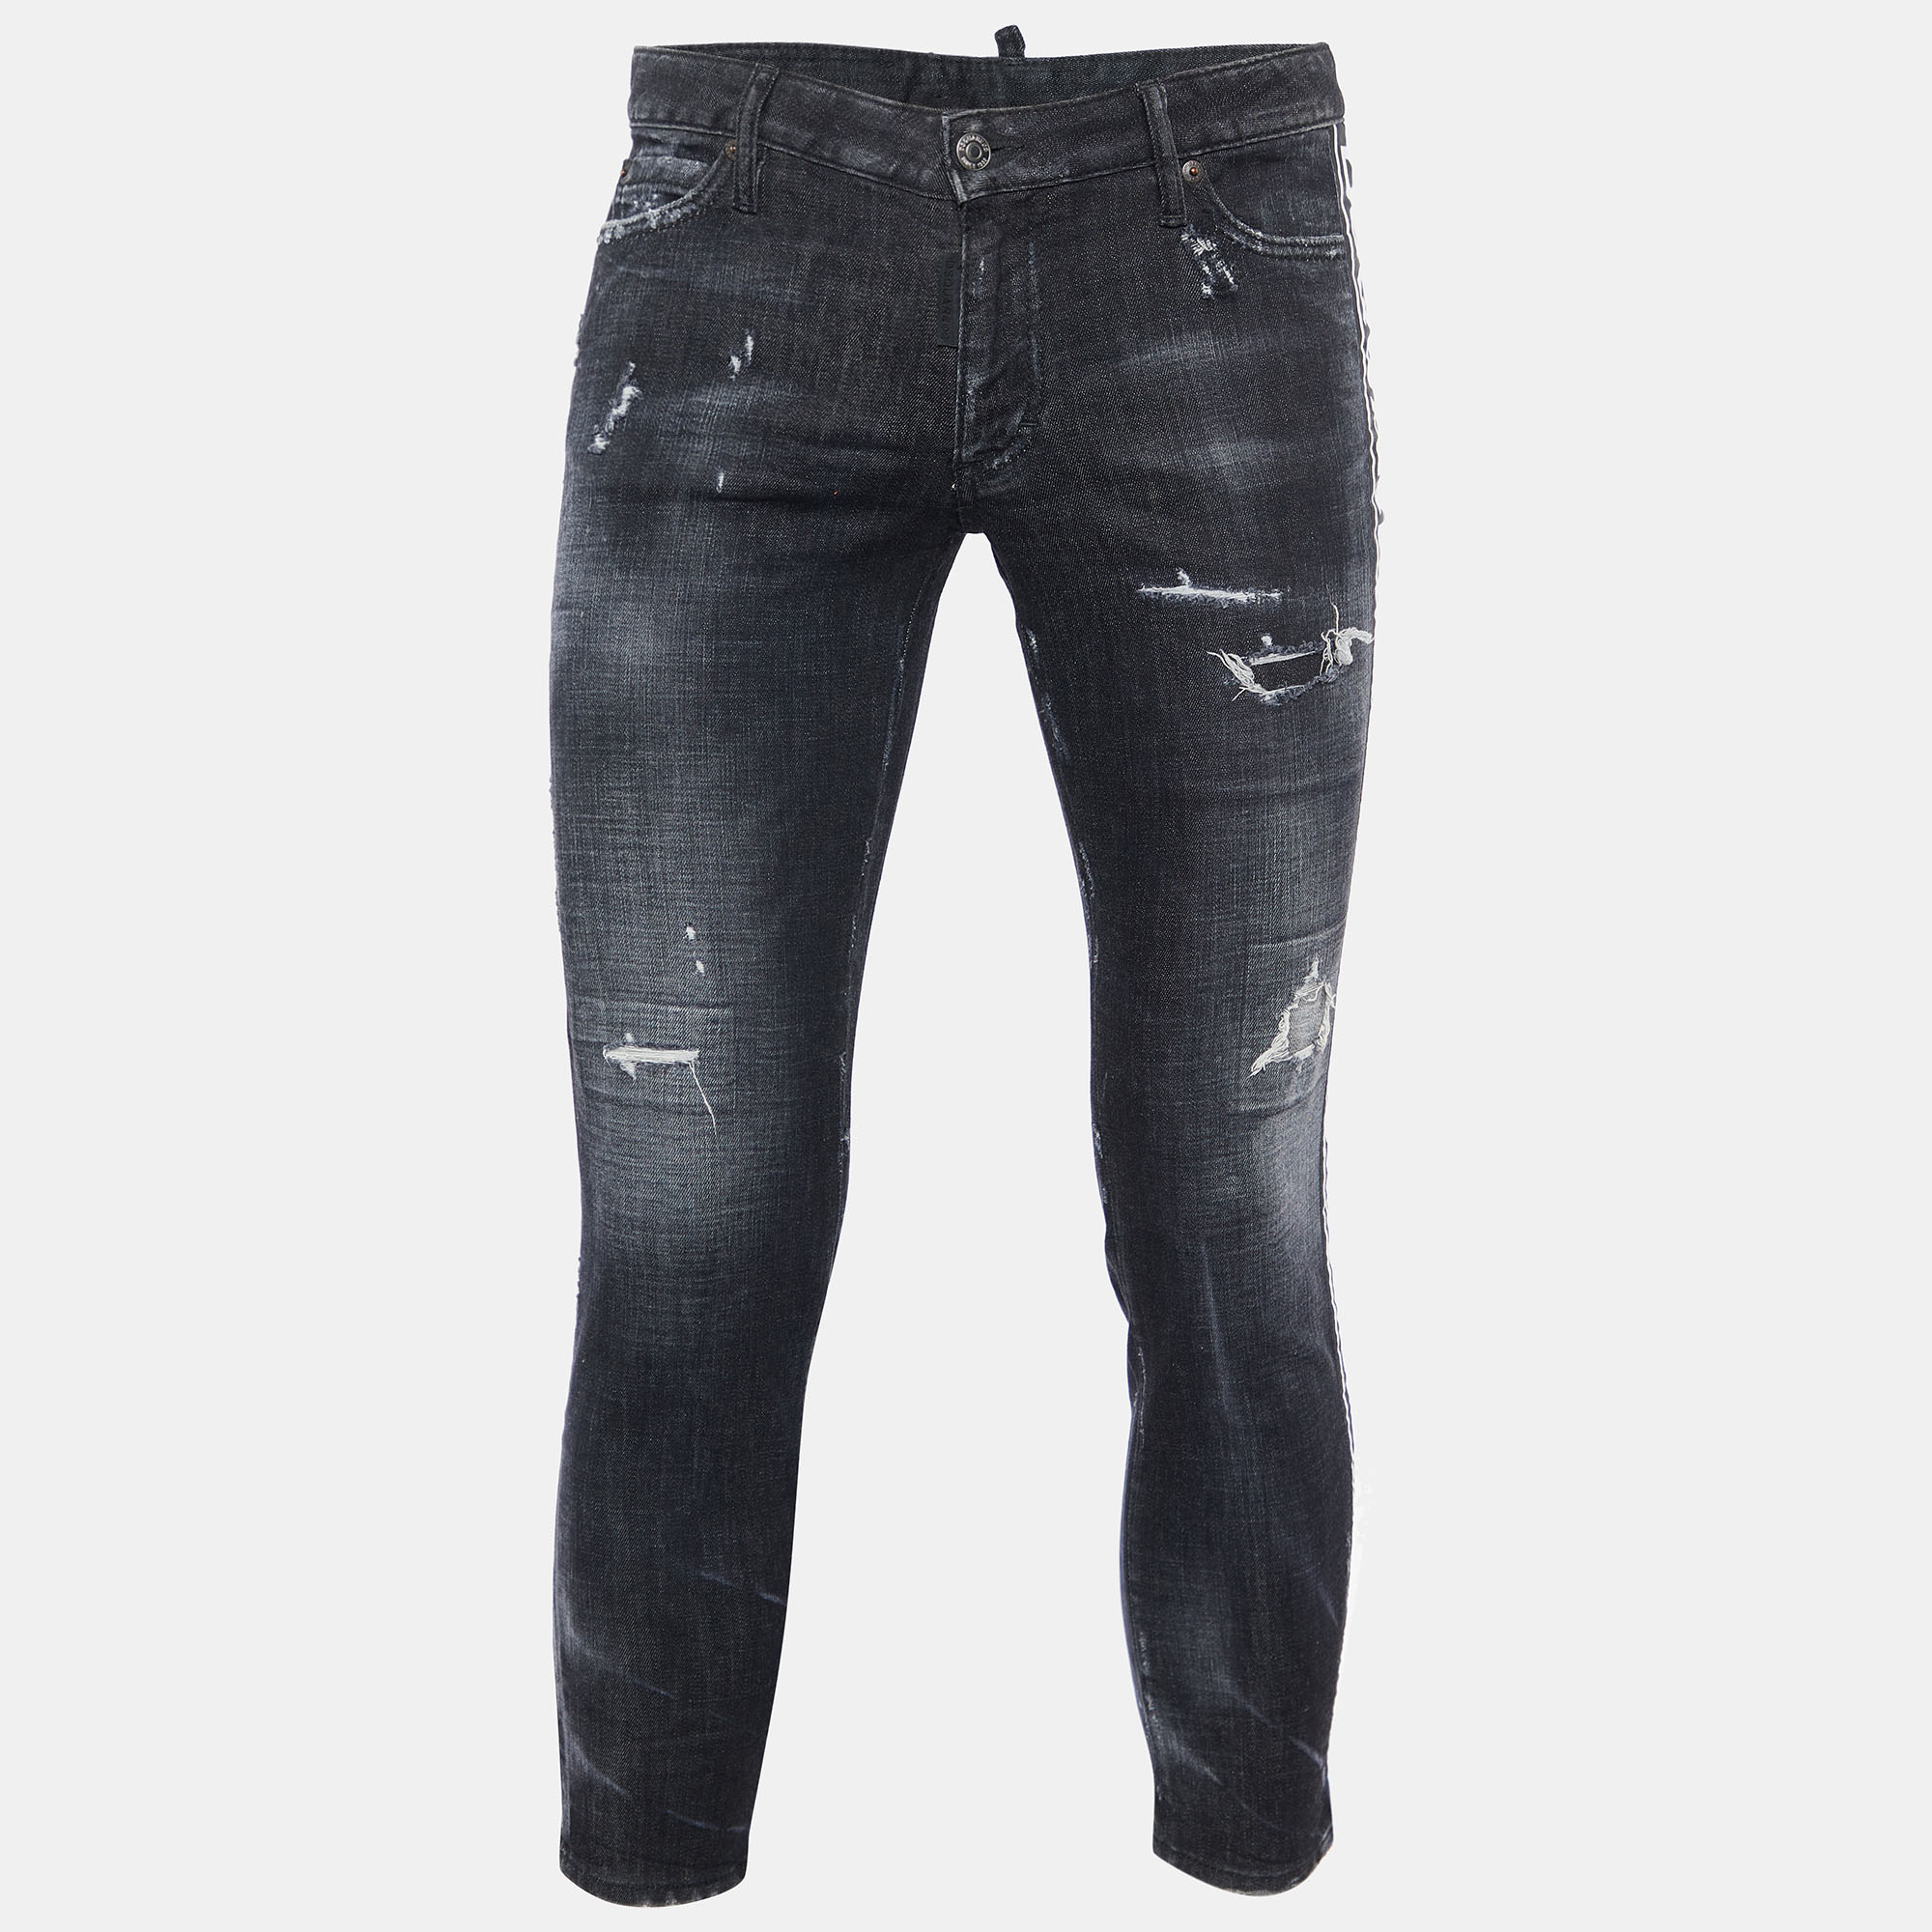 Your wardrobe can never be complete with a great pair of jeans like this. Tailored from best materials this pair showcases classic detailing an easy closure style and pockets. Pair it with your casual t shirts.